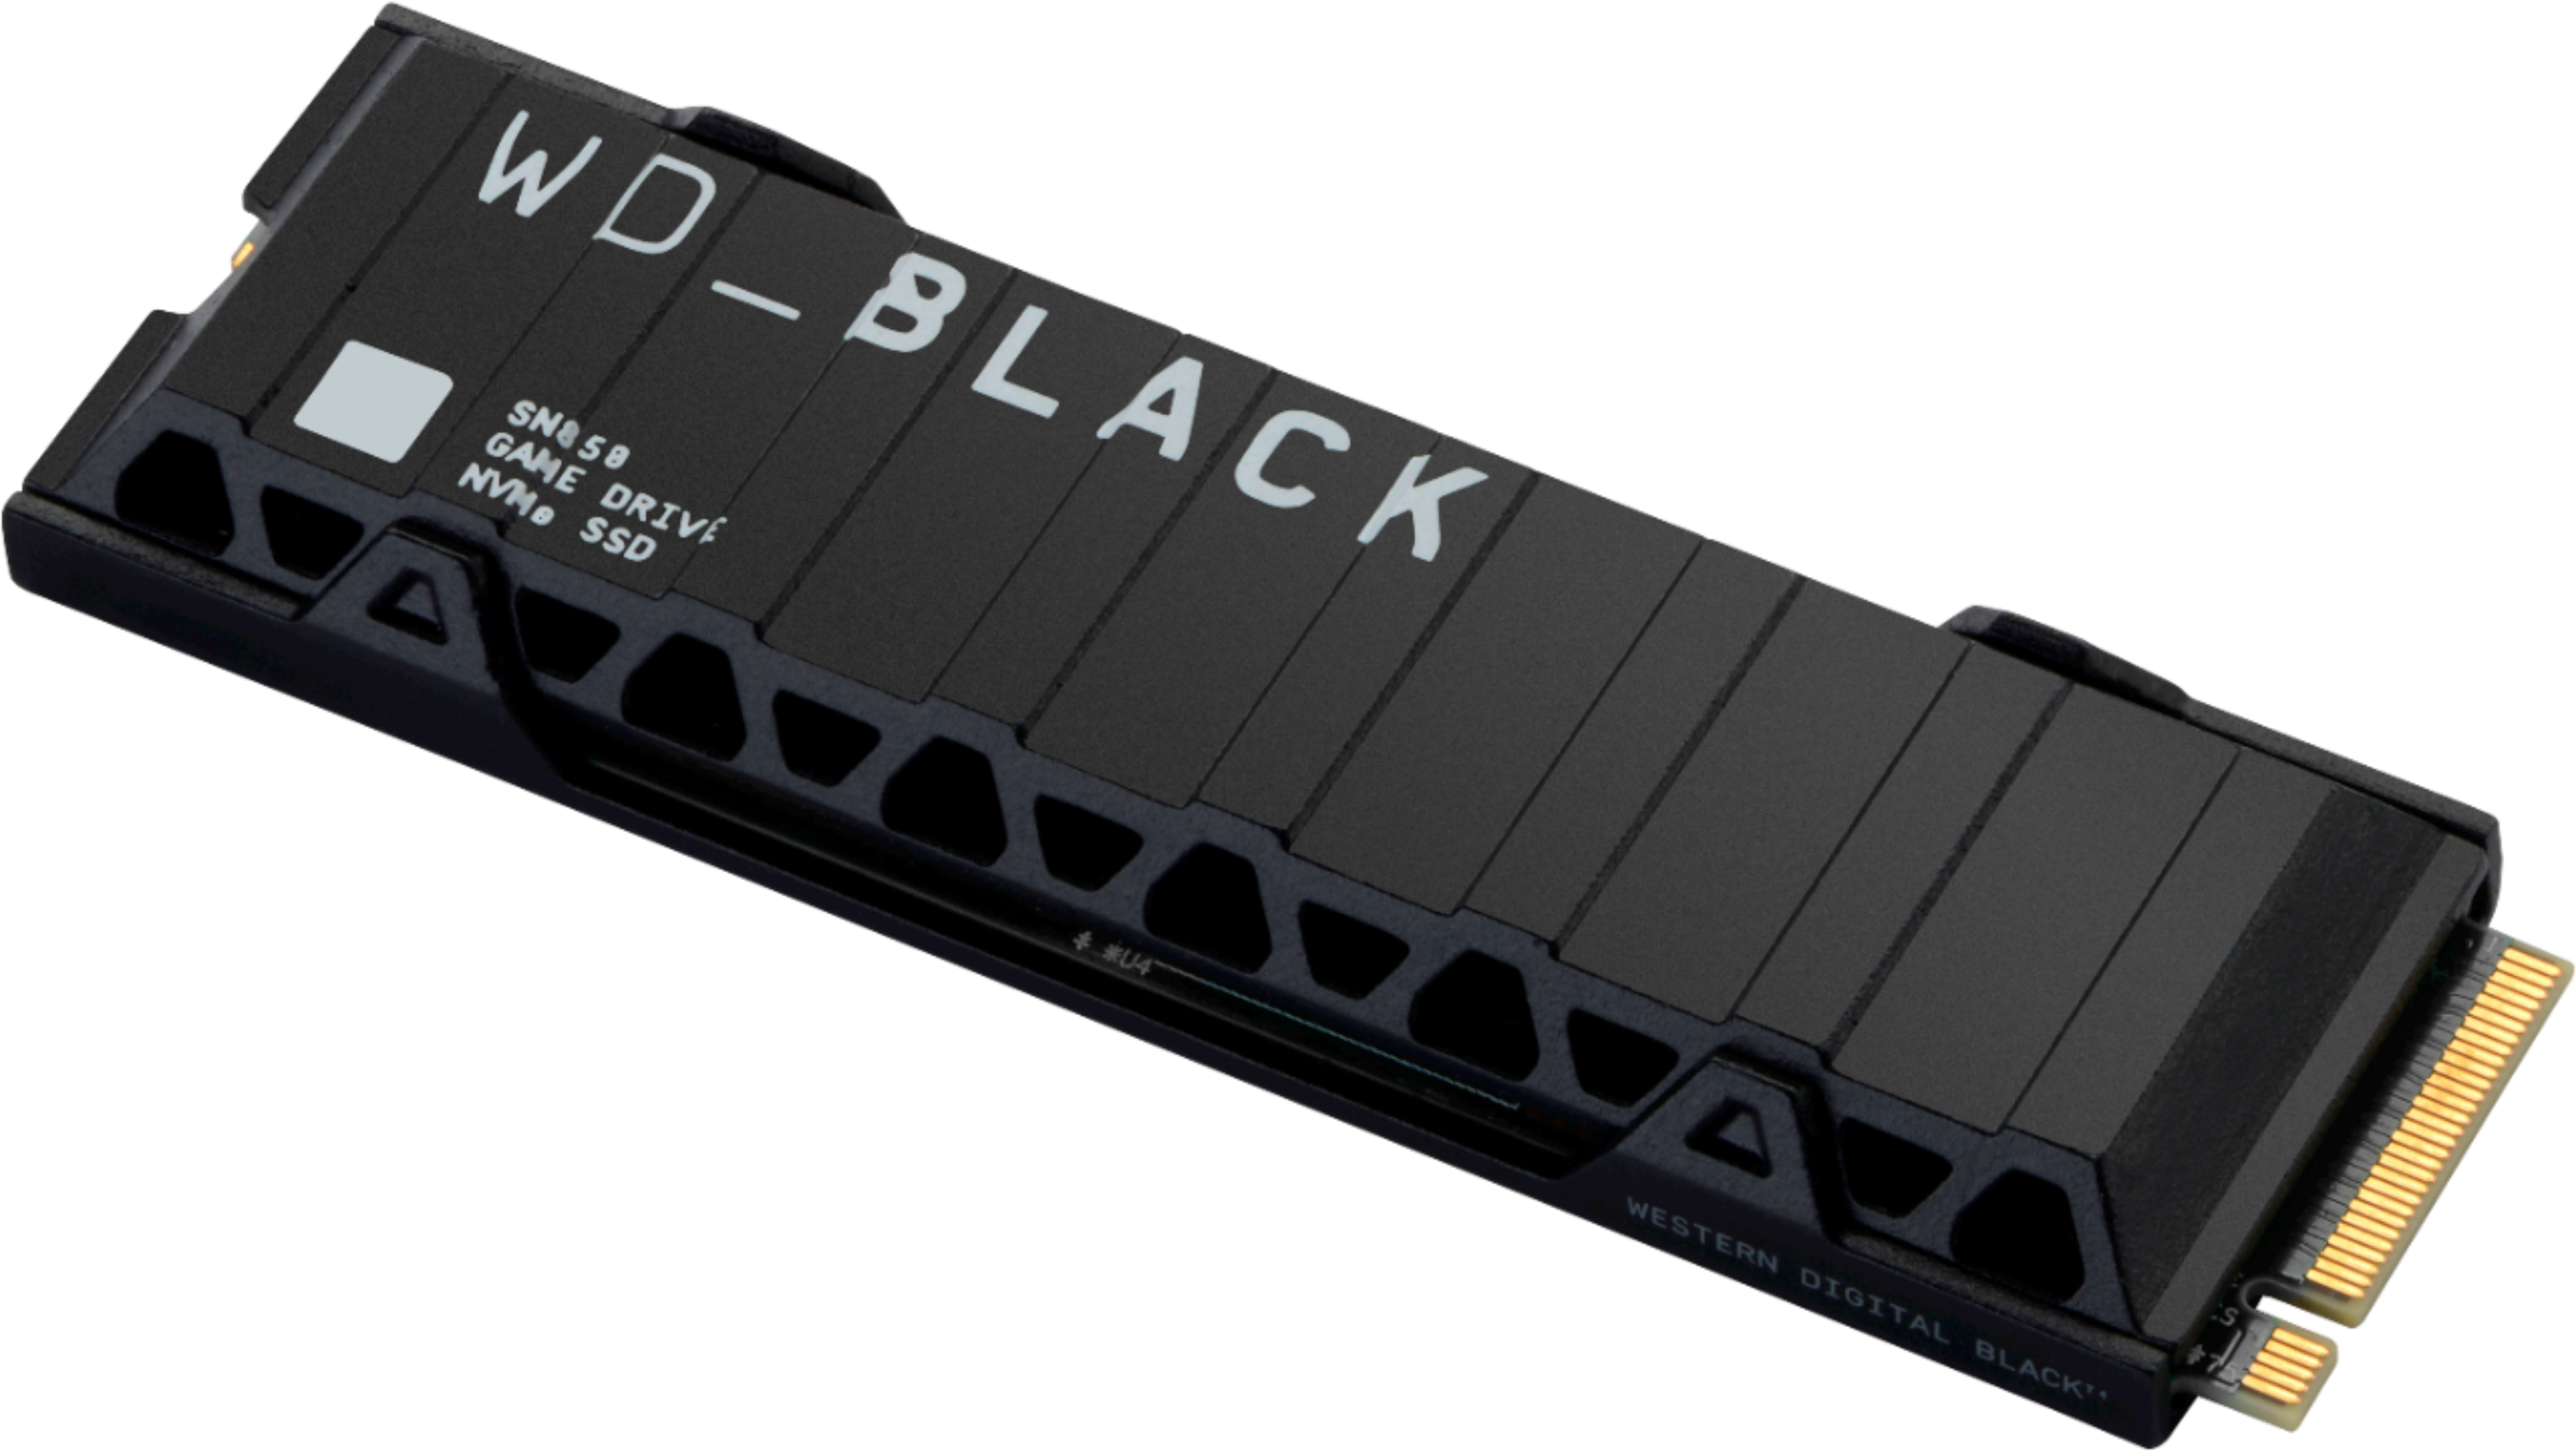 WD_BLACK 1TB SN850 NVMe SSD, Internal M.2 2280 Solid State Drive for PS5  Consoles - WDBBKW0010BBK-WRSN